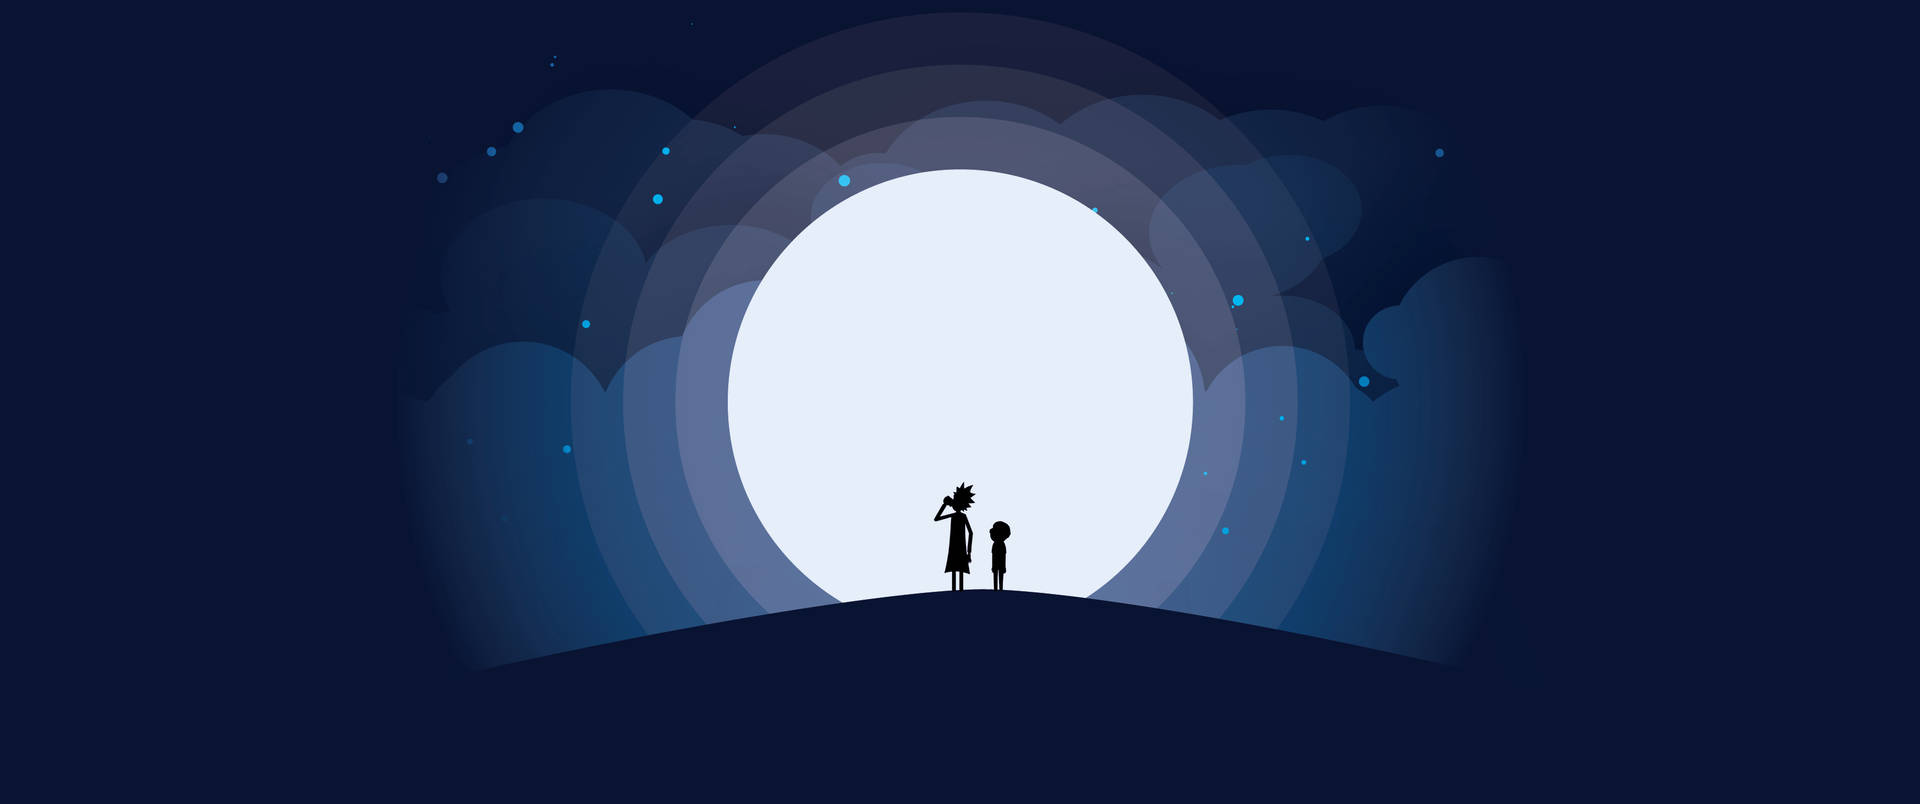 Rick And Morty Silhouette Against The Moon